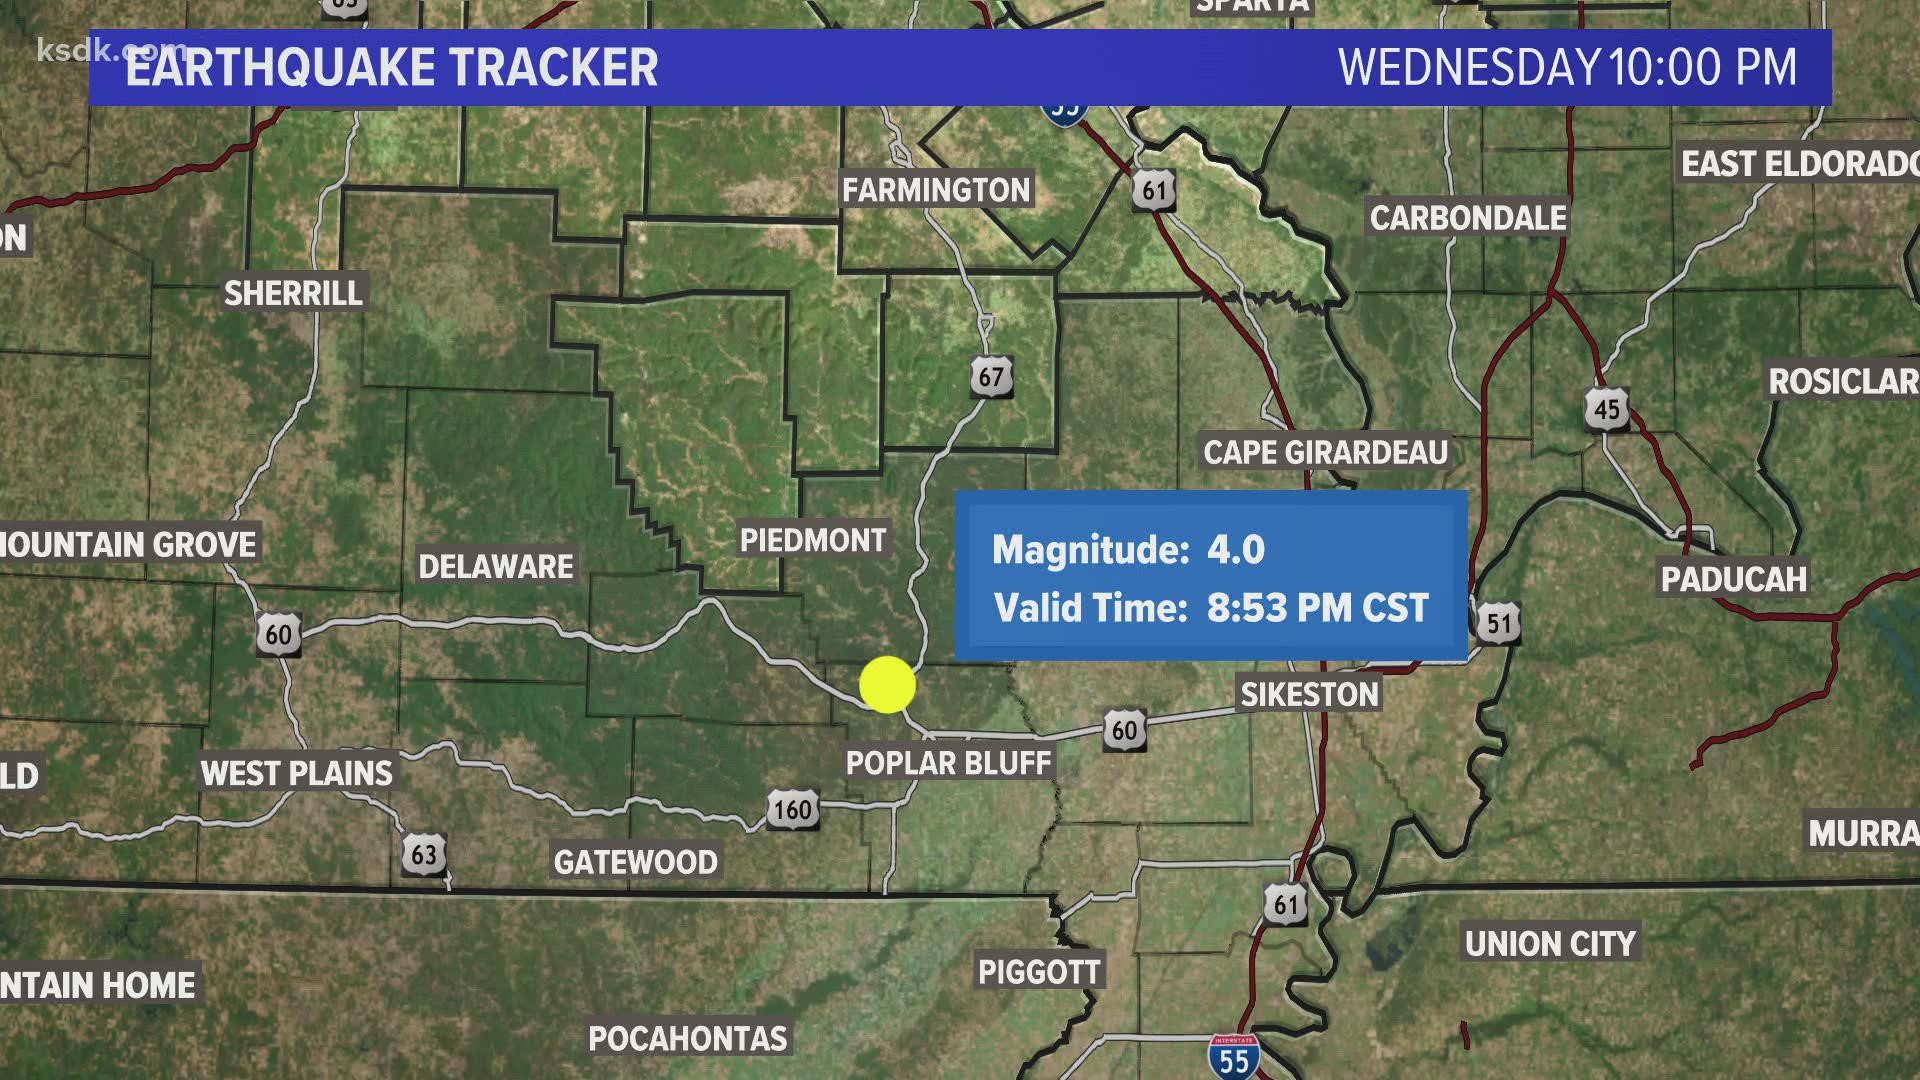 The magnitude 4.0 quake could be felt in parts of the metro St. Louis area